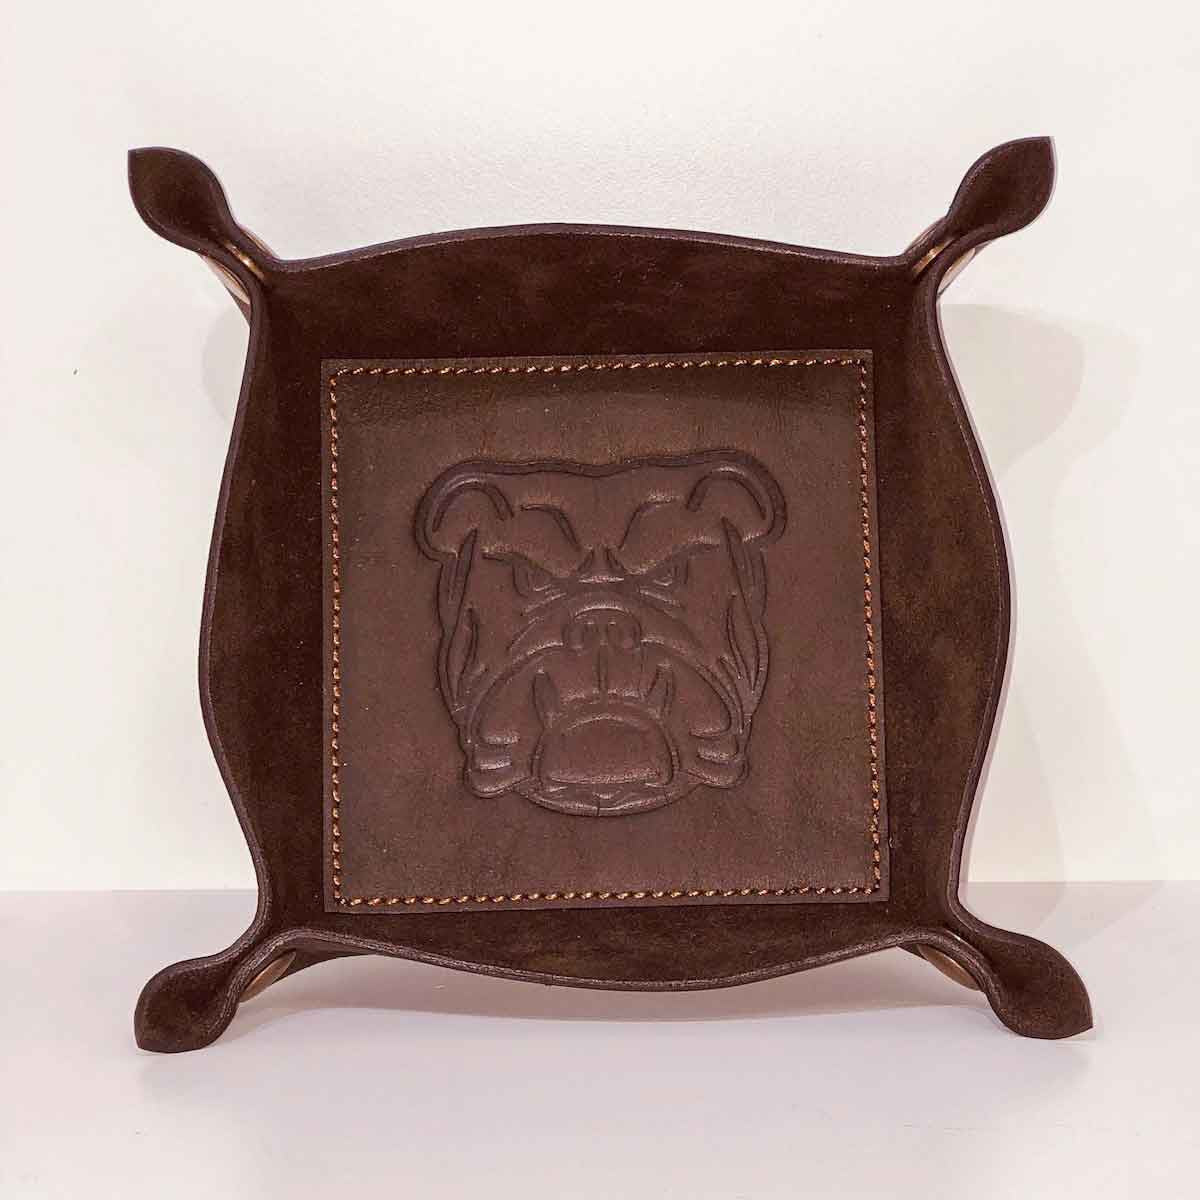 Bulldog Leather Embossed Valet Tray - Southern Grace Creations